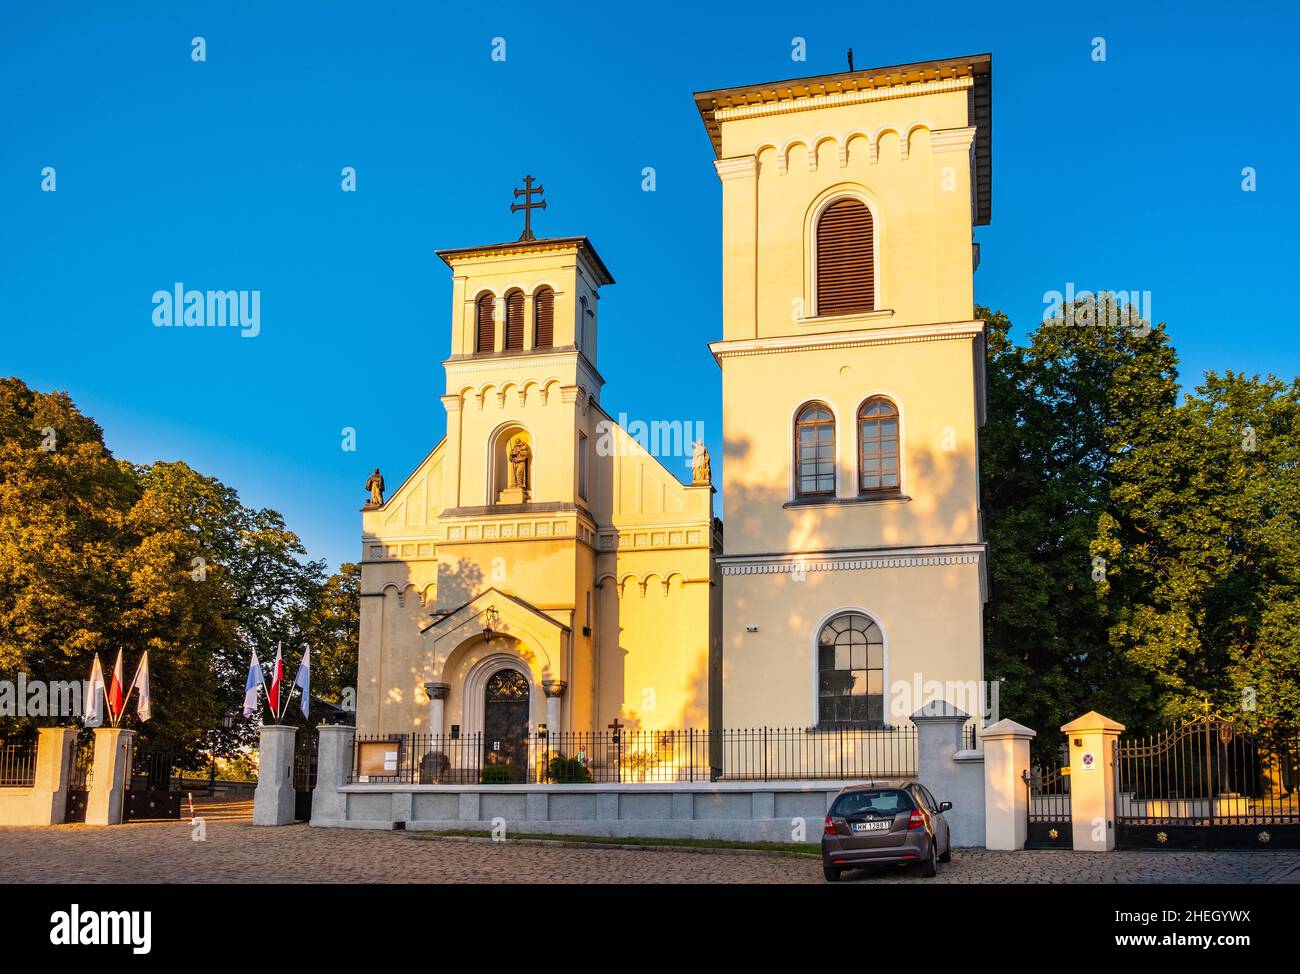 Warsaw, Poland - May 22, 2020: Neo-roman St. Catherine church and bell tower at Dolina Sluzewiecka street in Ursynow district of Warsaw Stock Photo